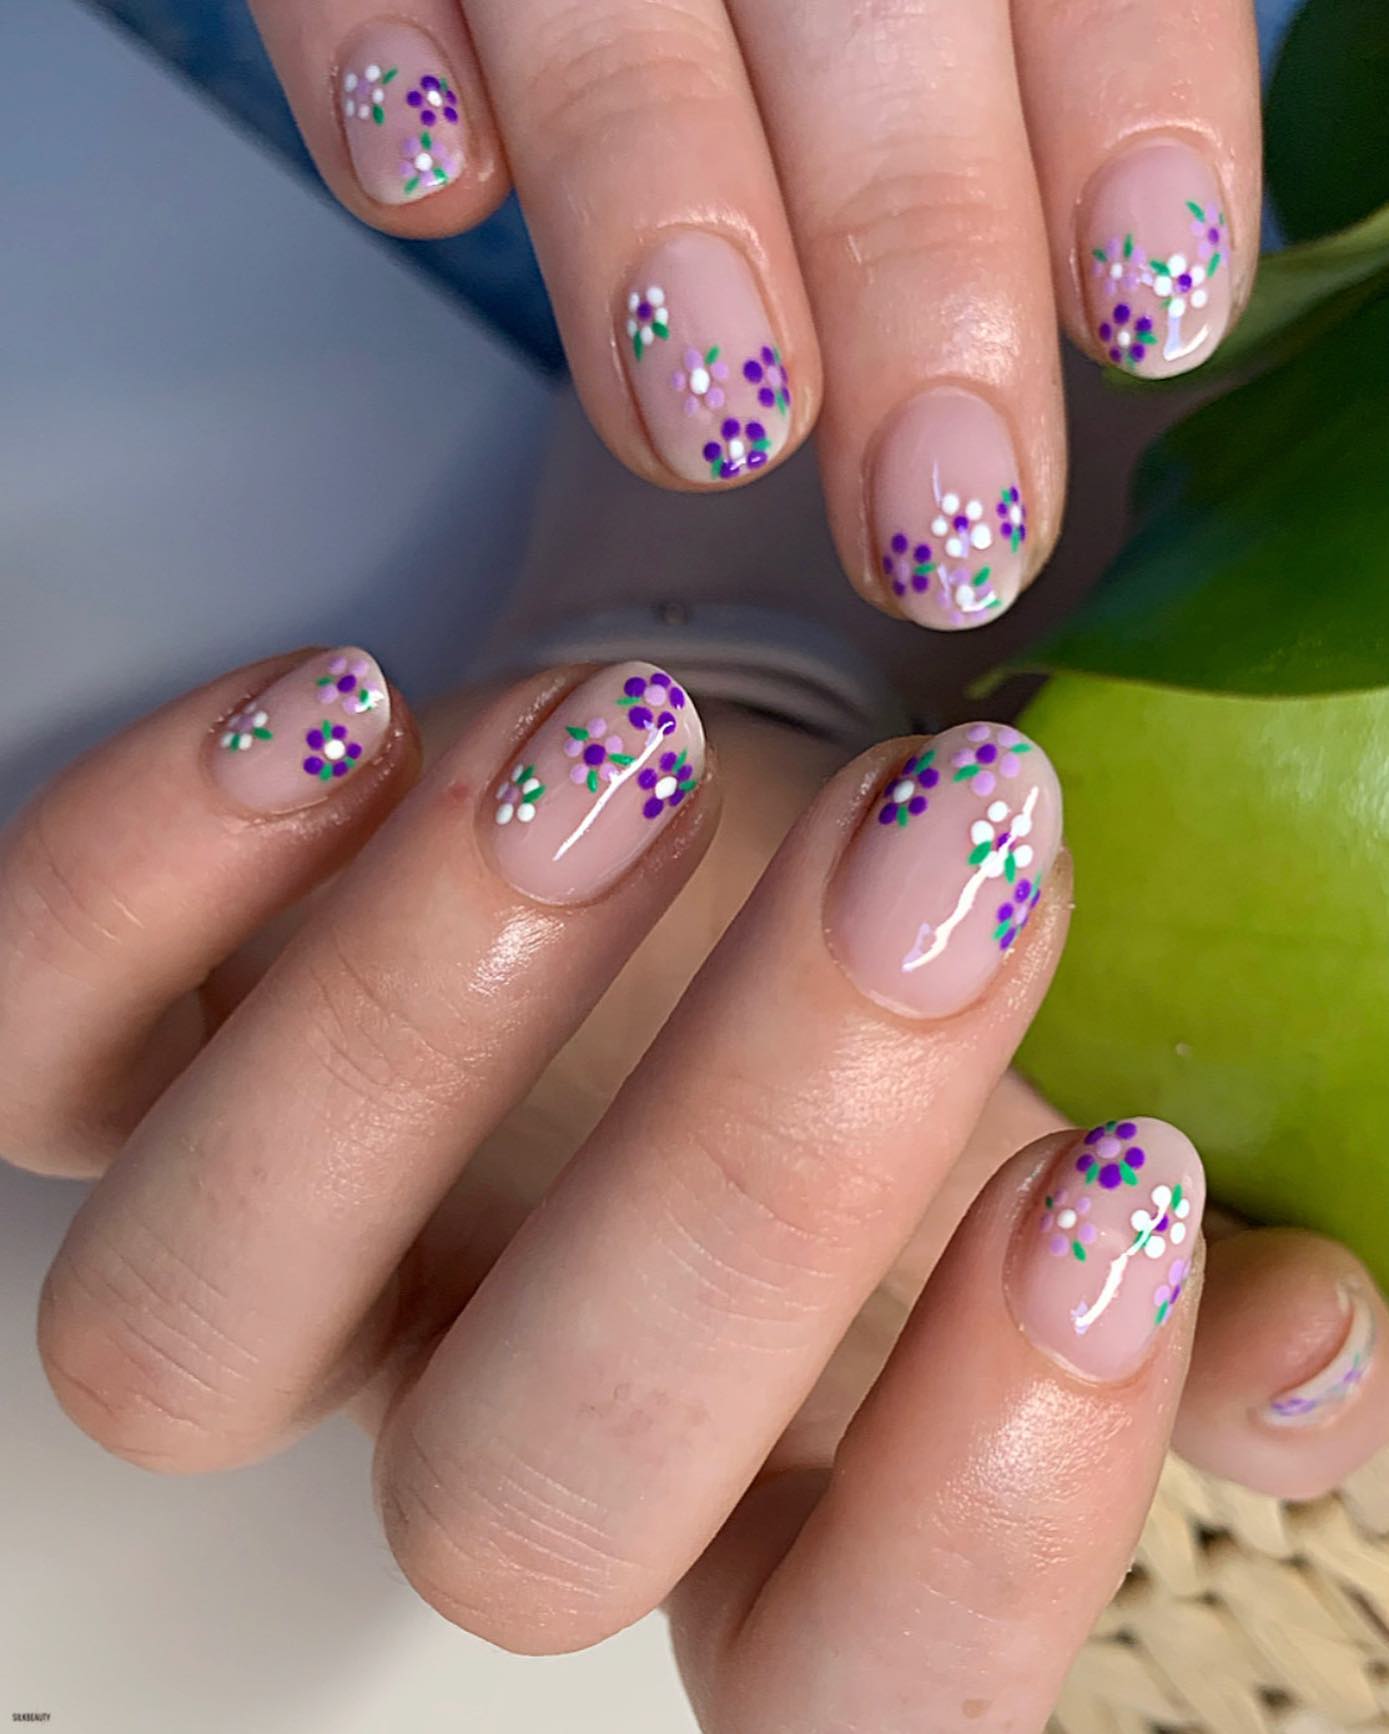 It is absolutely adorable to wear some lilac daisies. Even if you have short nails like the ones above, lilac daisies are sure to give a cute look.